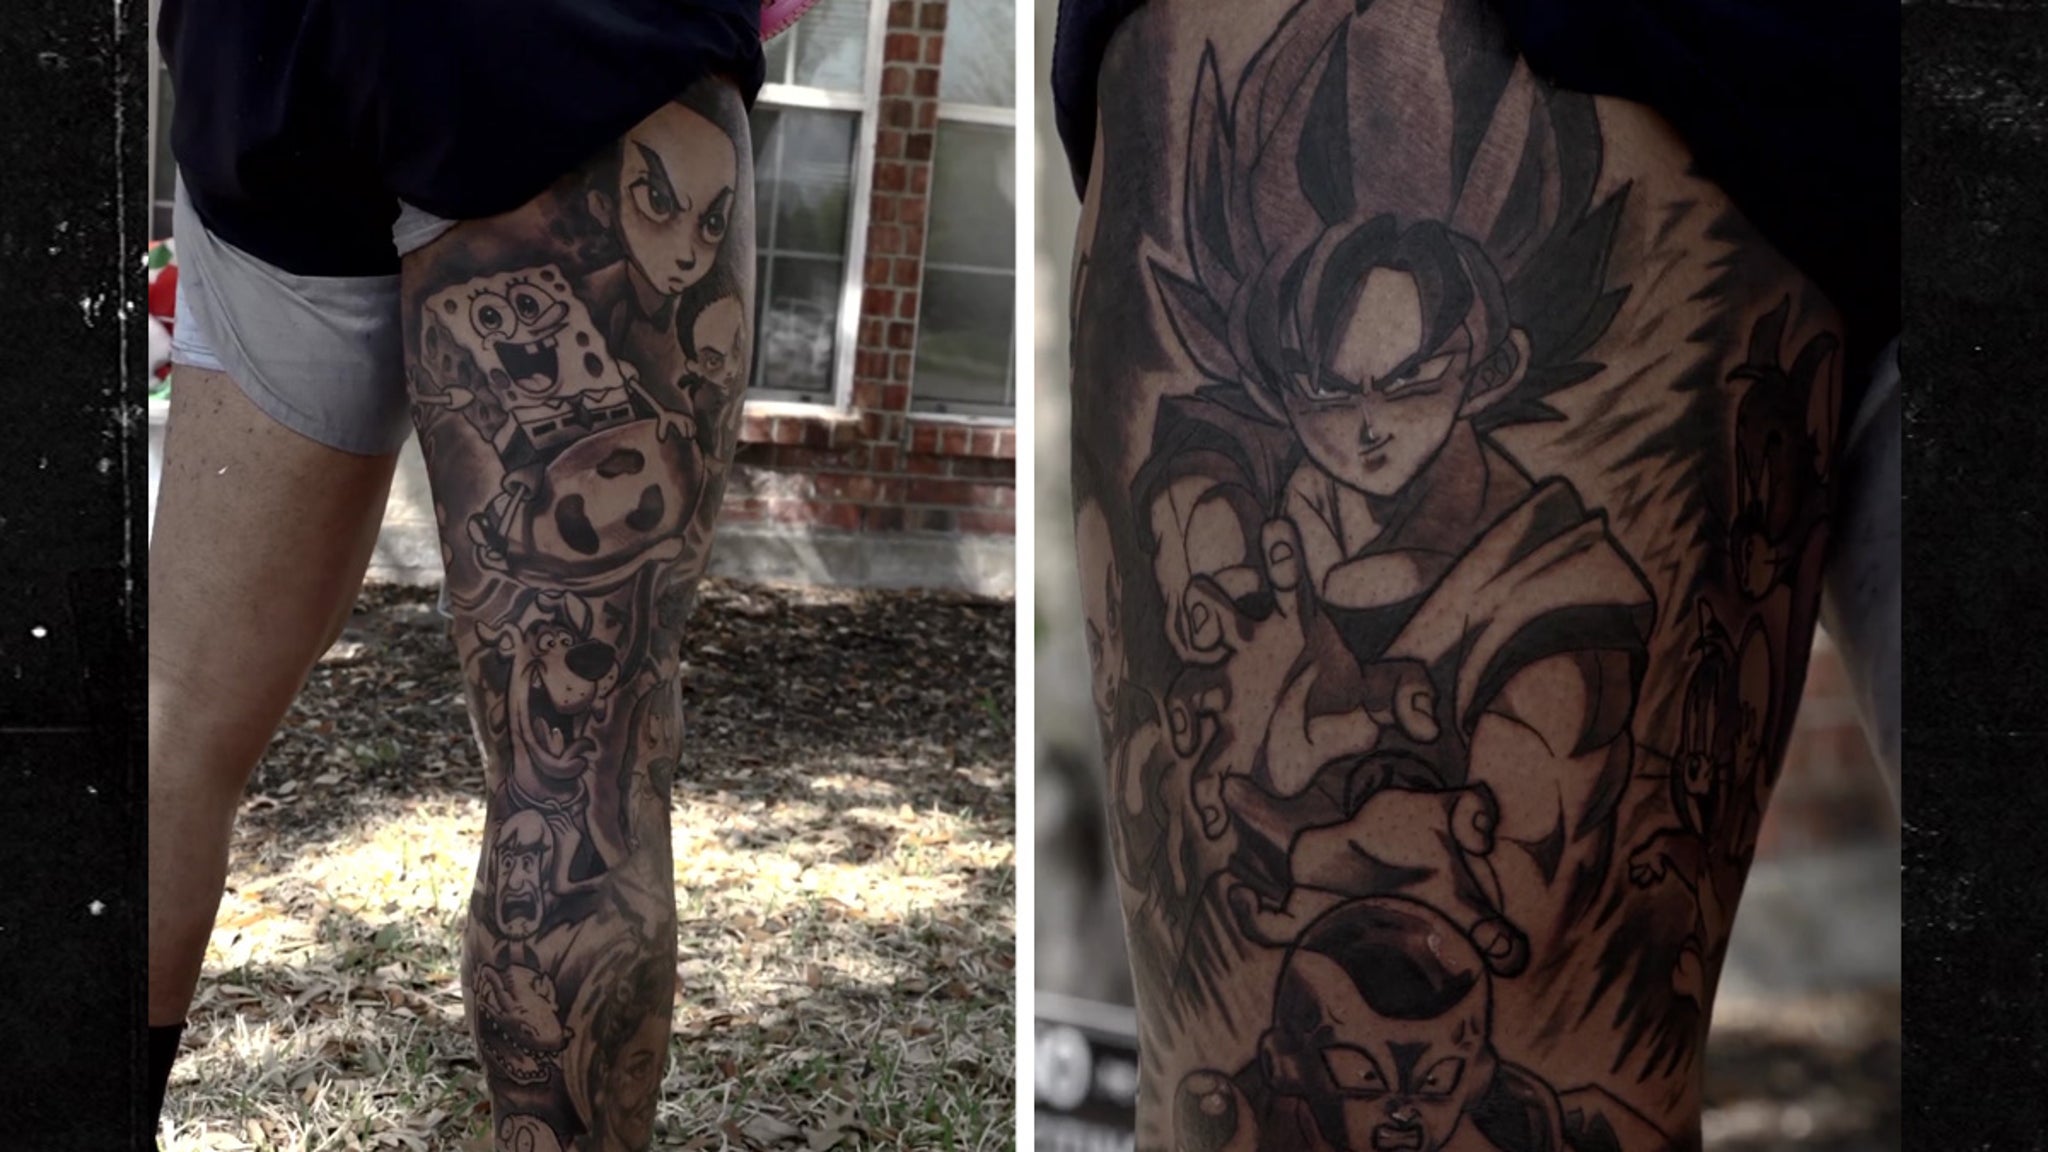 Shanghai Tattoo  Awesome Dragon Ball Z half sleeve completed by Tala   Talas books are open shoot us an email at tattooshurt666gmail to  get some rad ink from him    